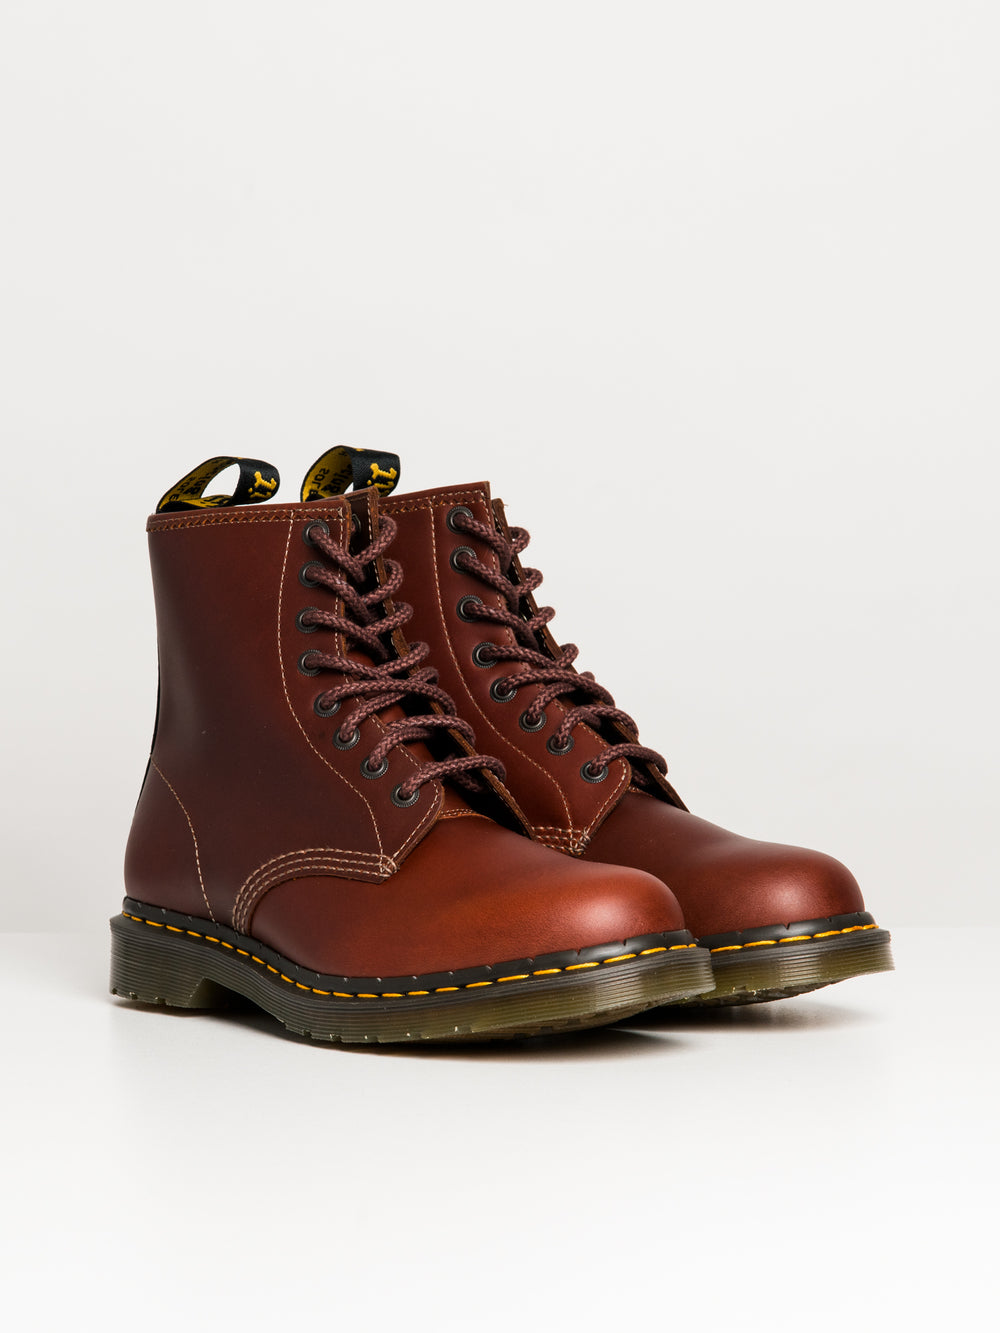 MENS DR MARTENS 1460 ABRUZZO WATERPROOF BOOT - CLEARANCE